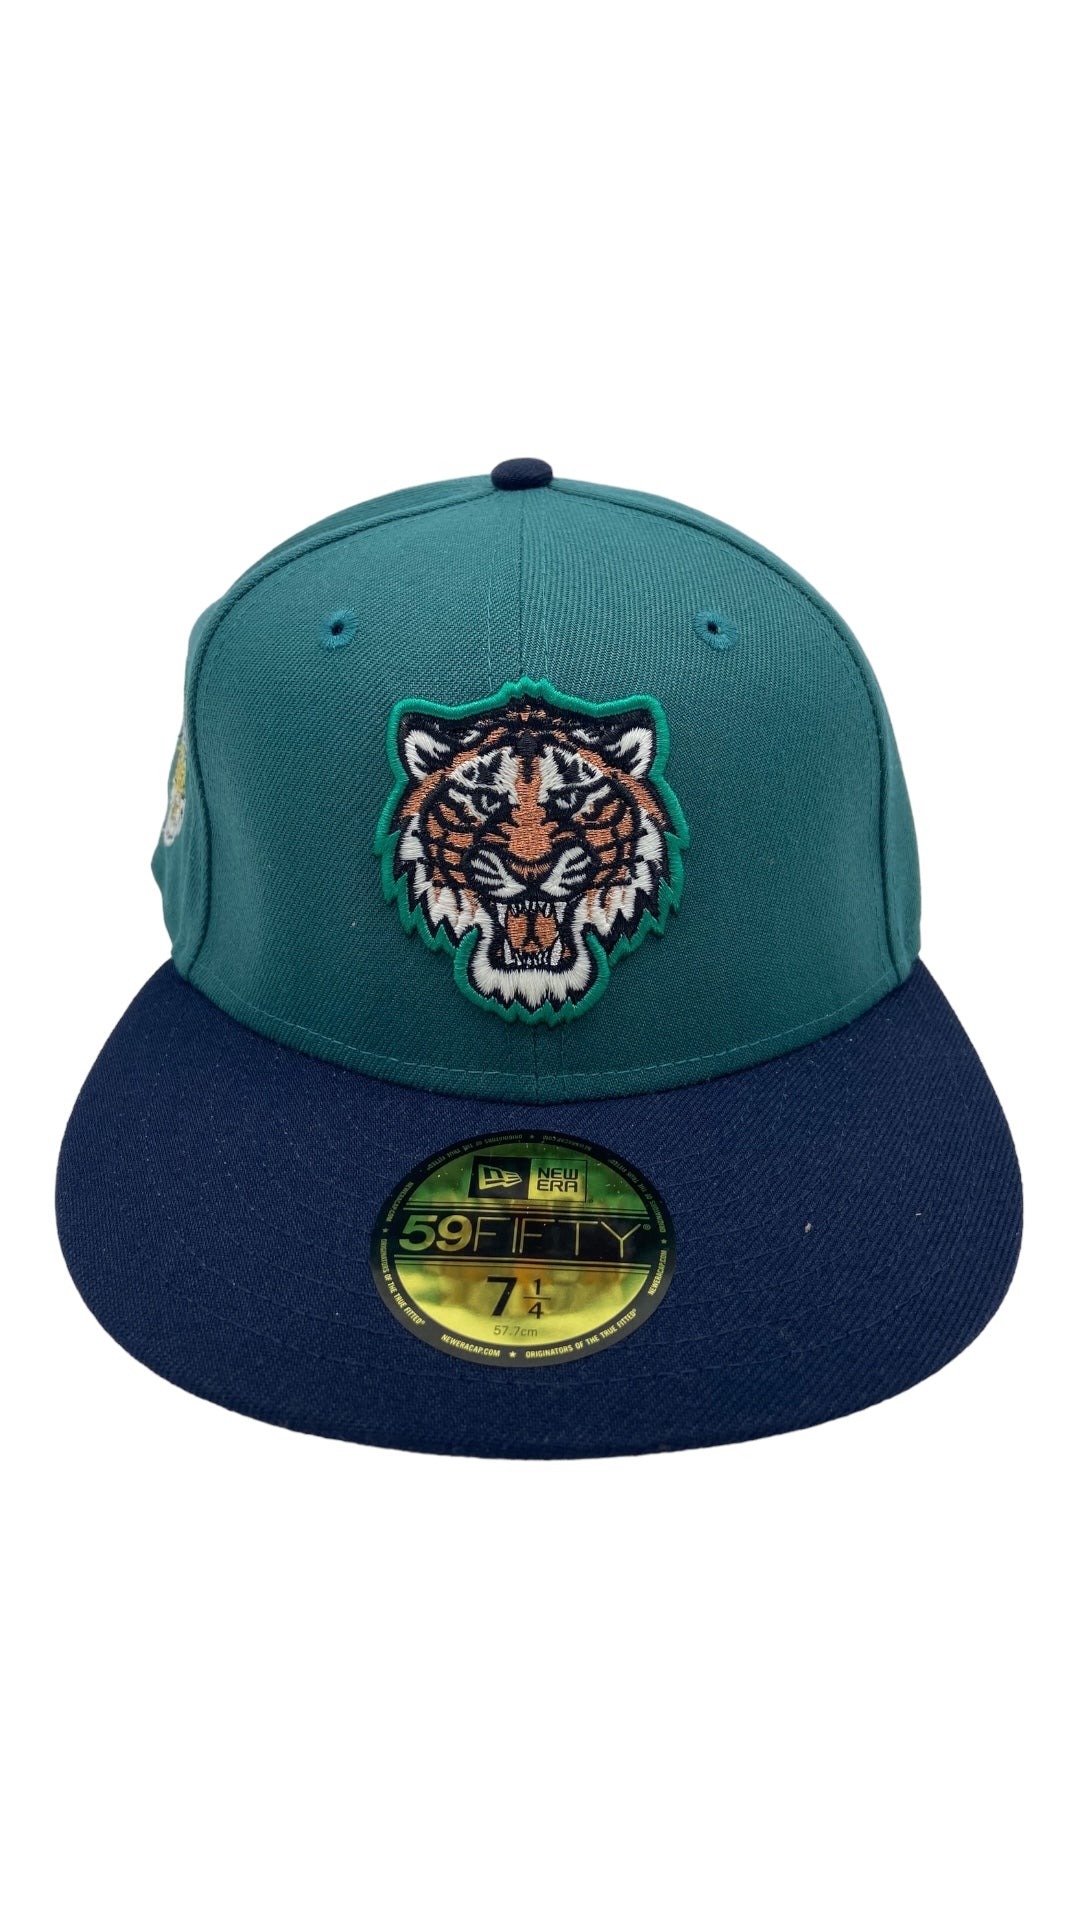 Detroit Tigers 2000 Teal/Blue Fitted Hat